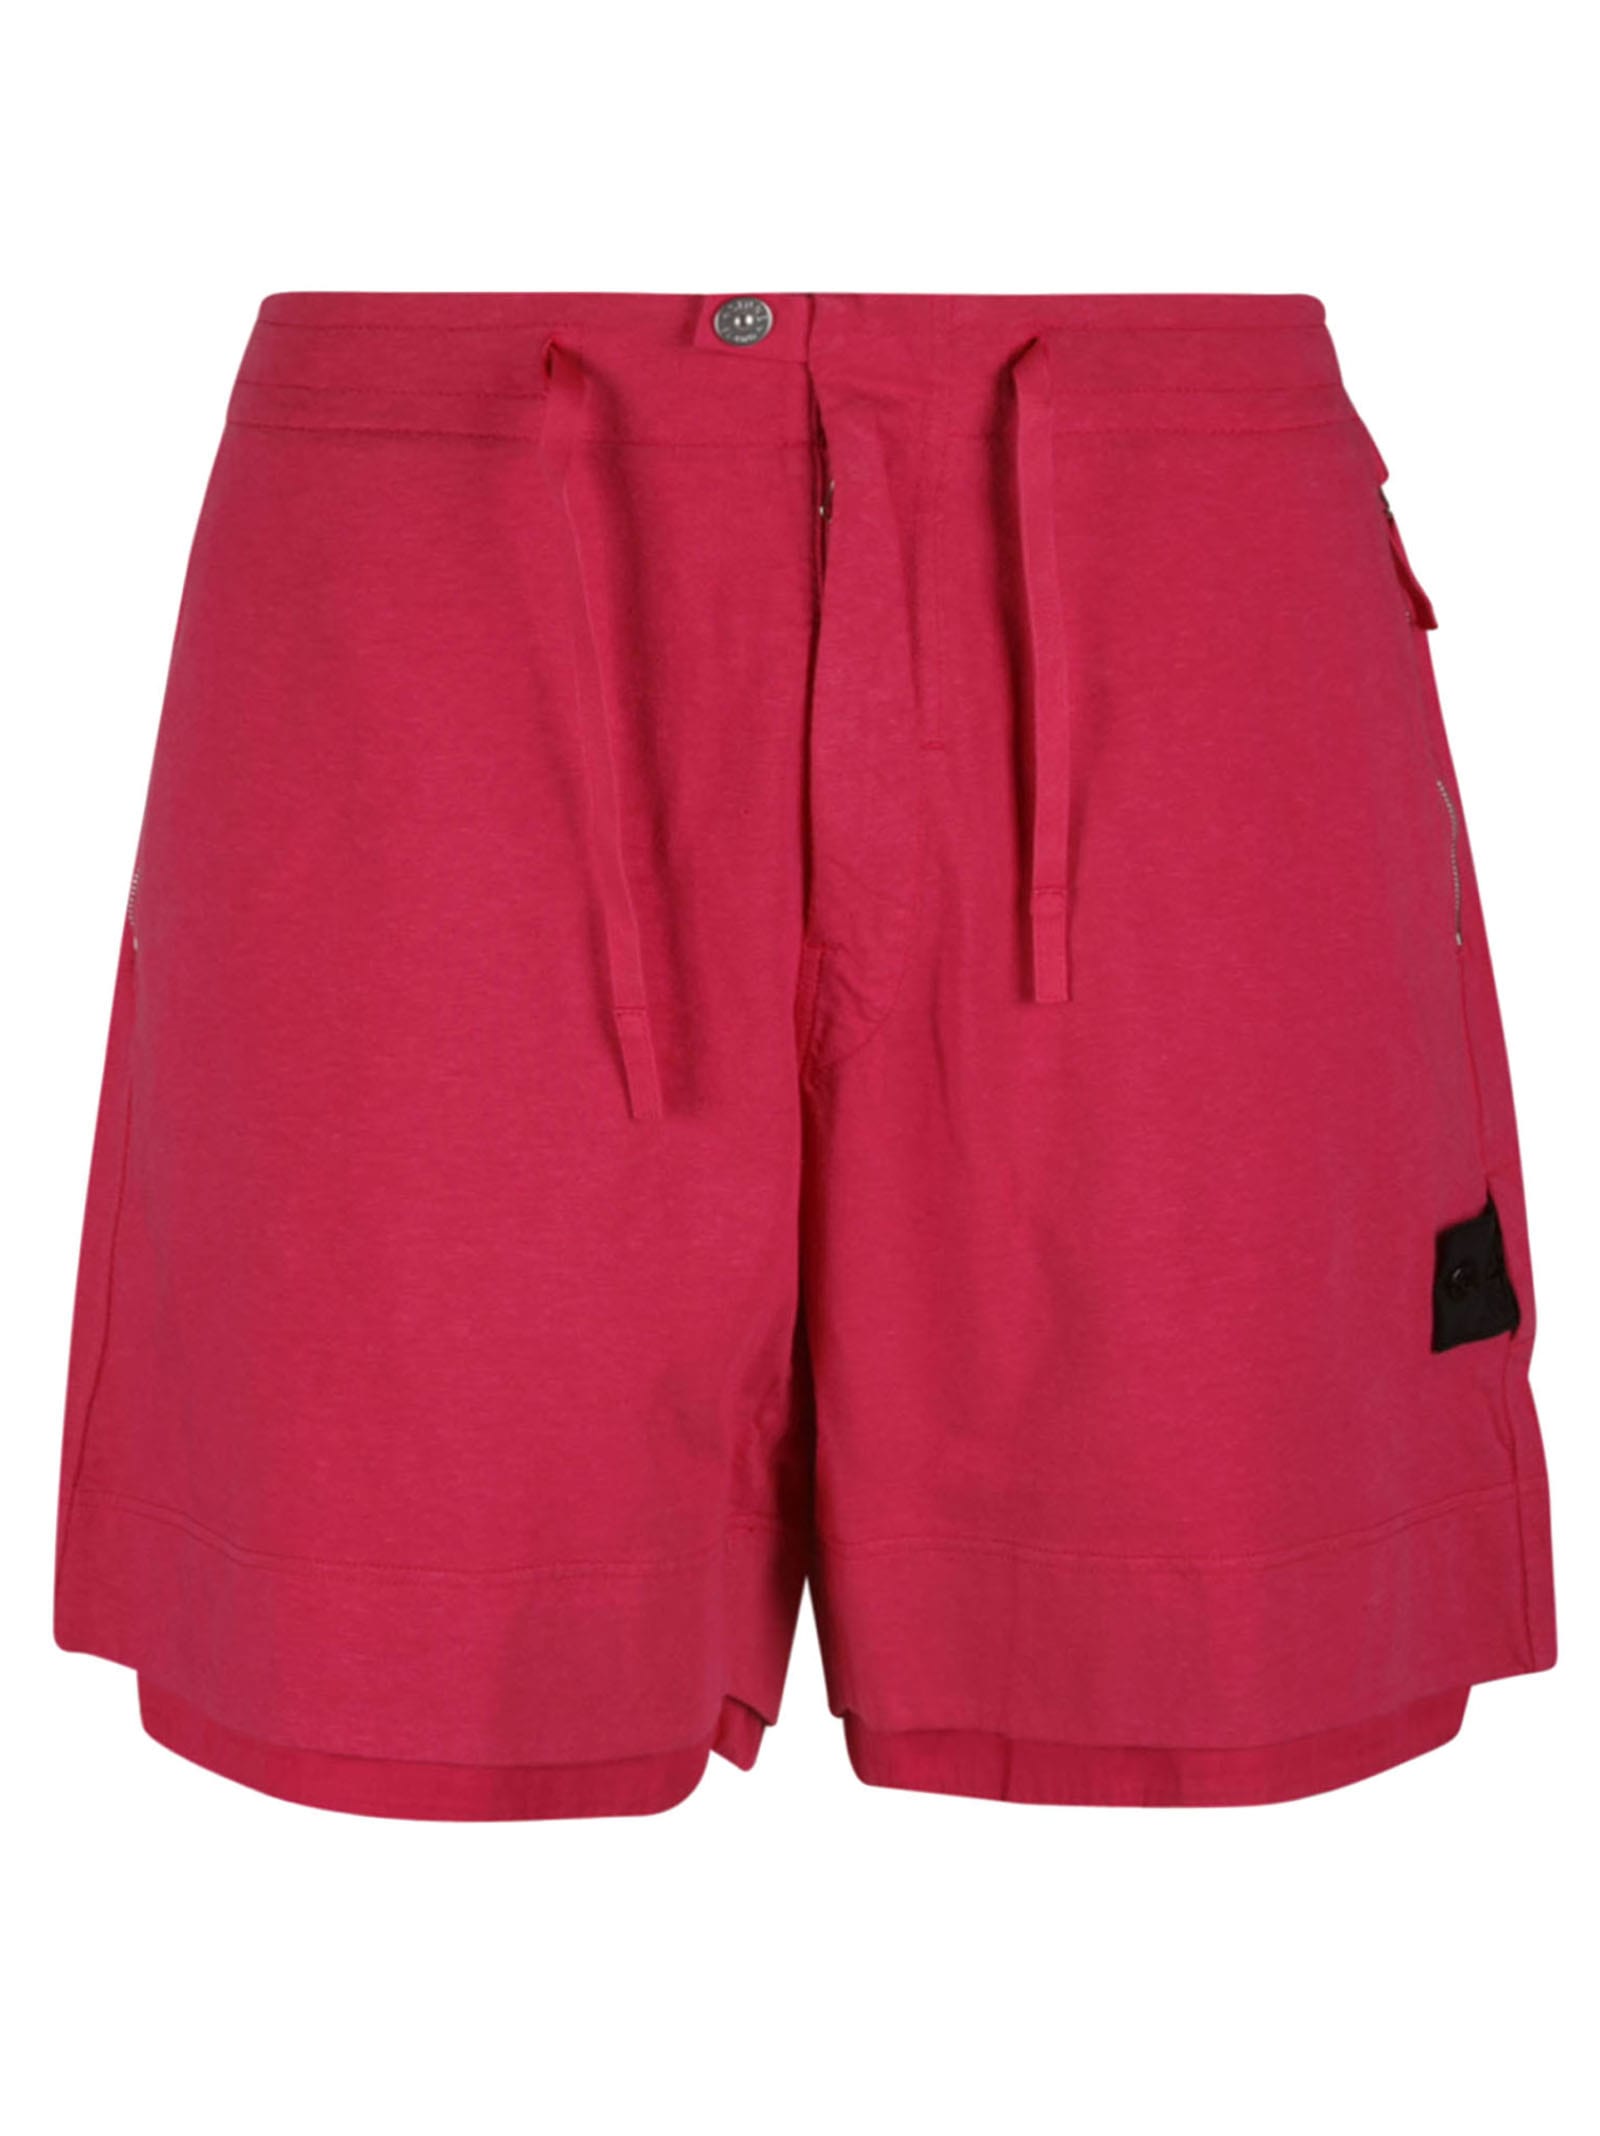 STONE ISLAND SHADOW PROJECT LOGO PATCHED DRAWSTRING WAIST SHORTS